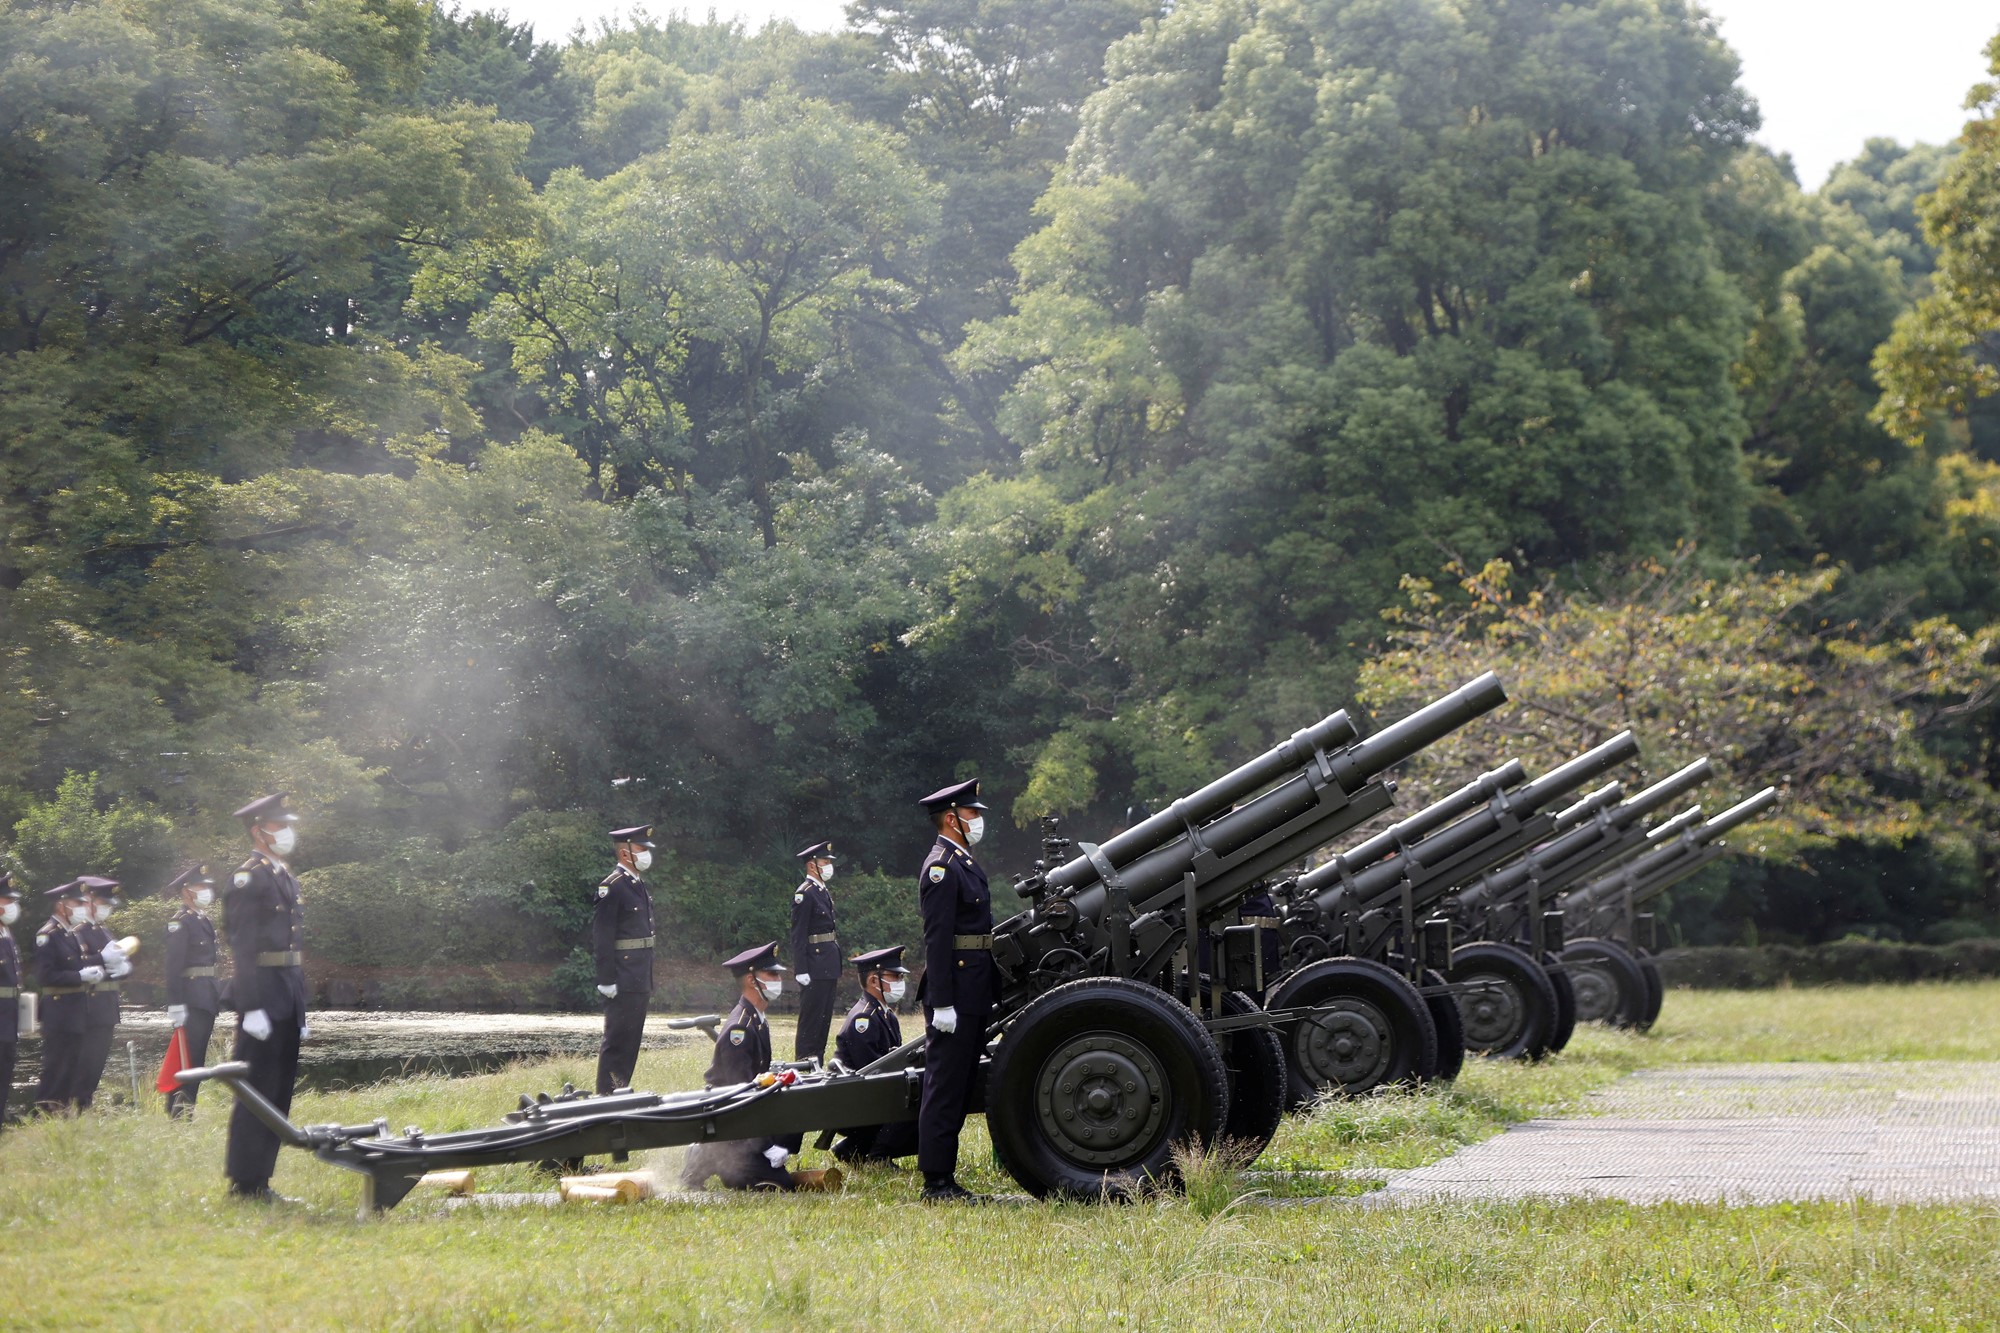 Japanese Ground Self-Defense Force personnel fire cannons at the Budokan grounds for the State Funeral 